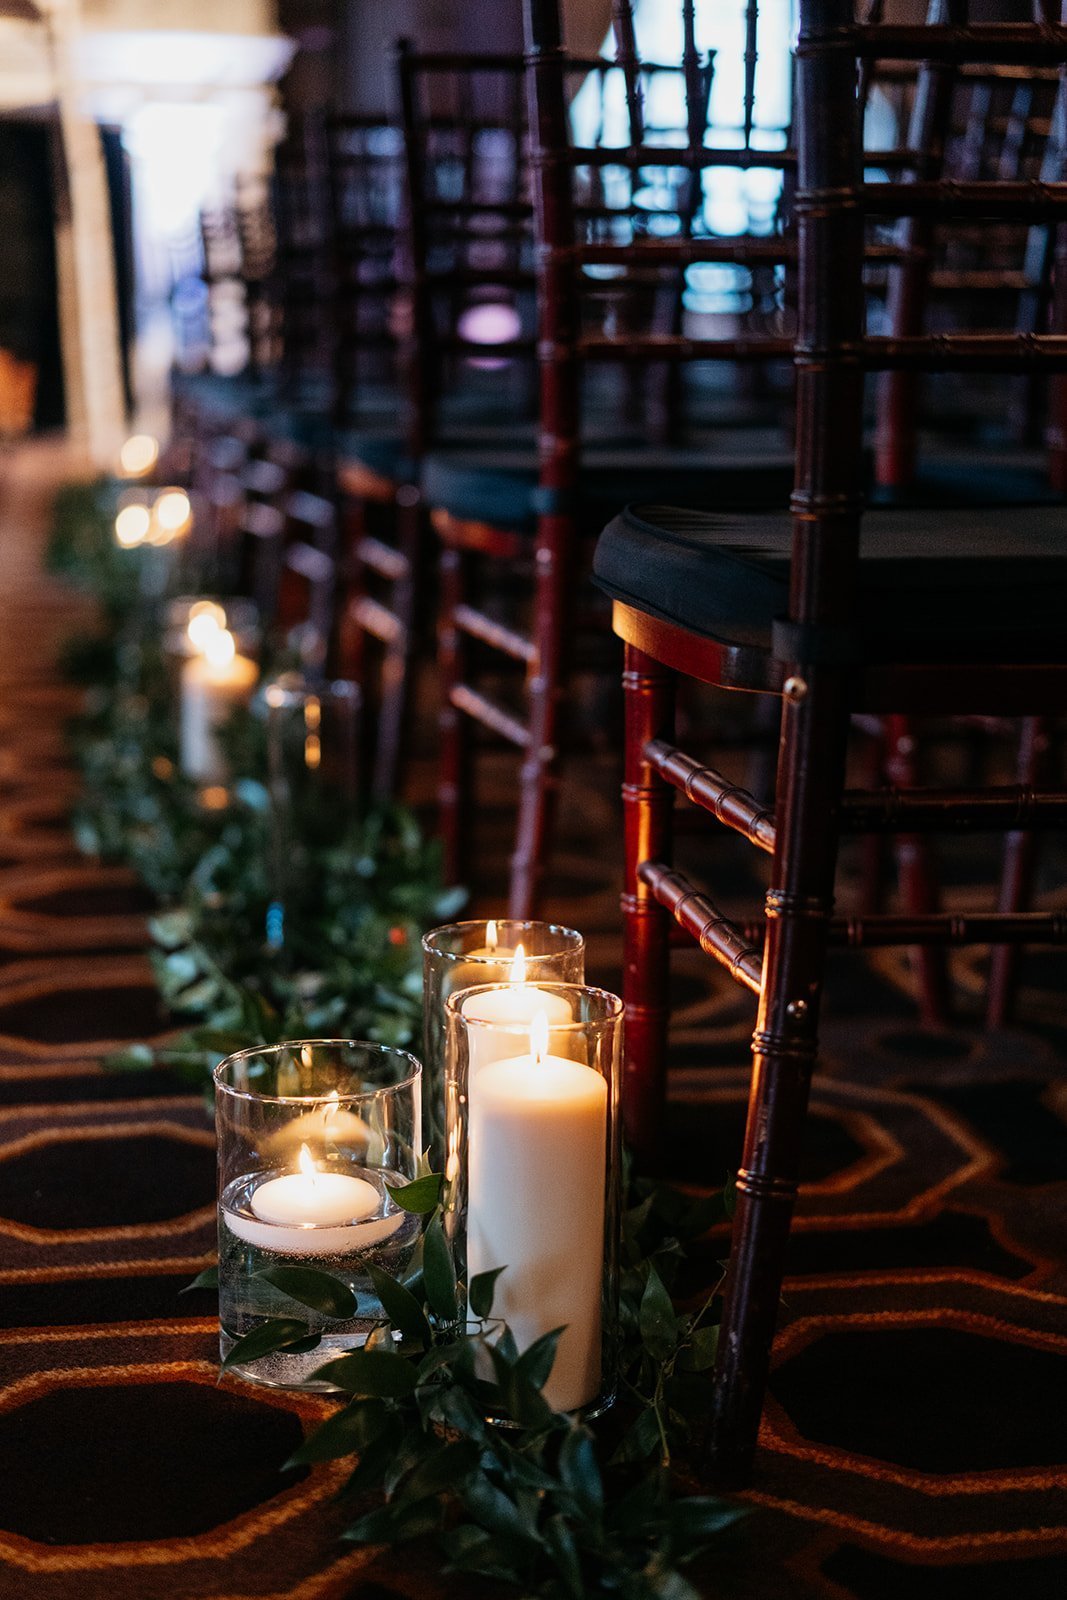 A black and white wedding inspiration. This Russian wedding was held at the Julia Morgan Ballroom in San Francisco. Ballroom wedding inspiration, black and white wedding theme, black wedding decorations.